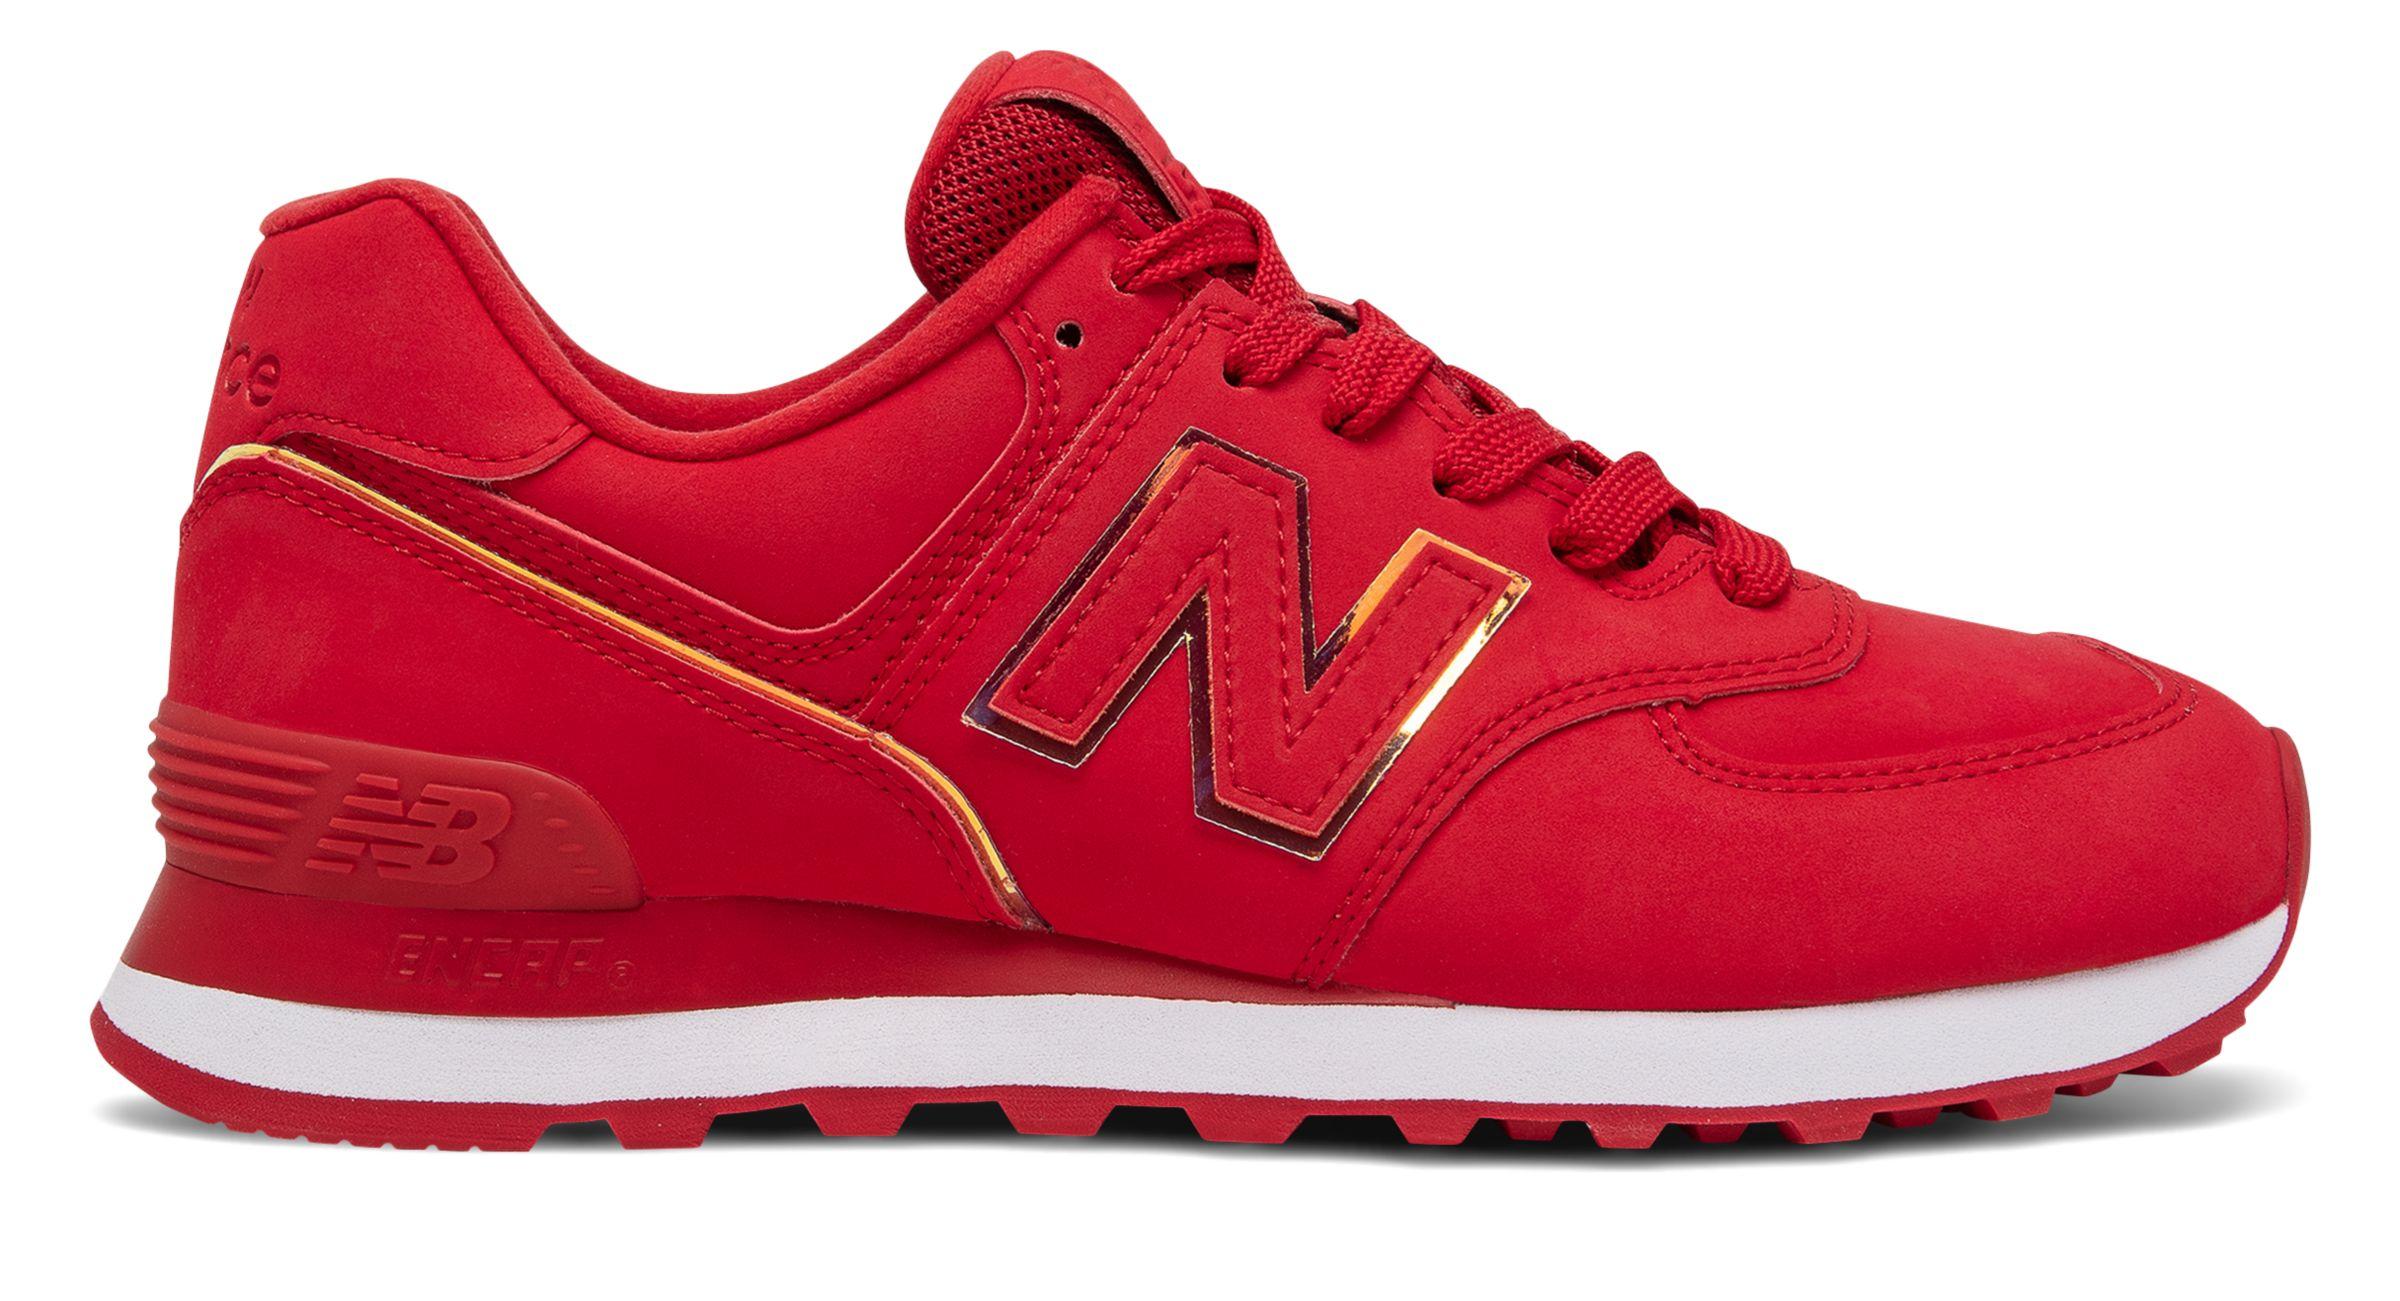 New Balance Suede 574 Iridescent Casual Sneakers From Finish Line in Red |  Lyst